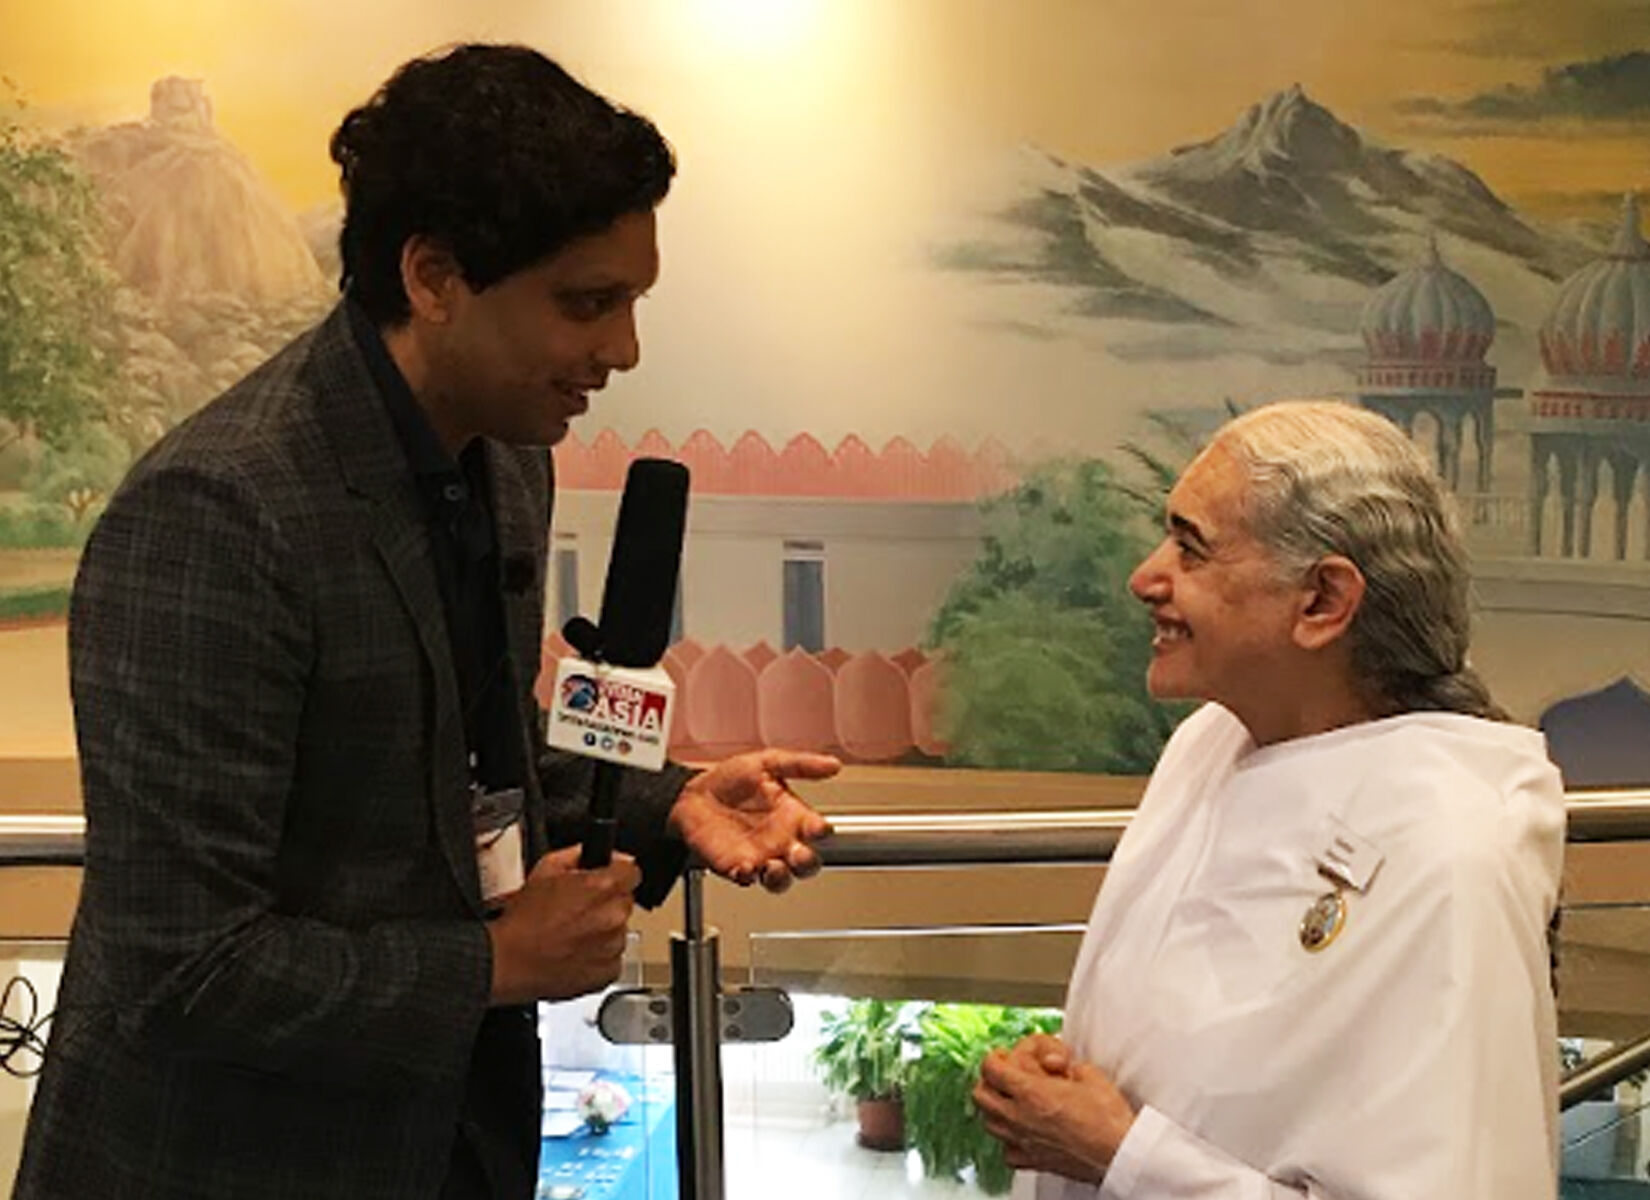 Interviewed by Keith Lobo, British Asia News, 2019